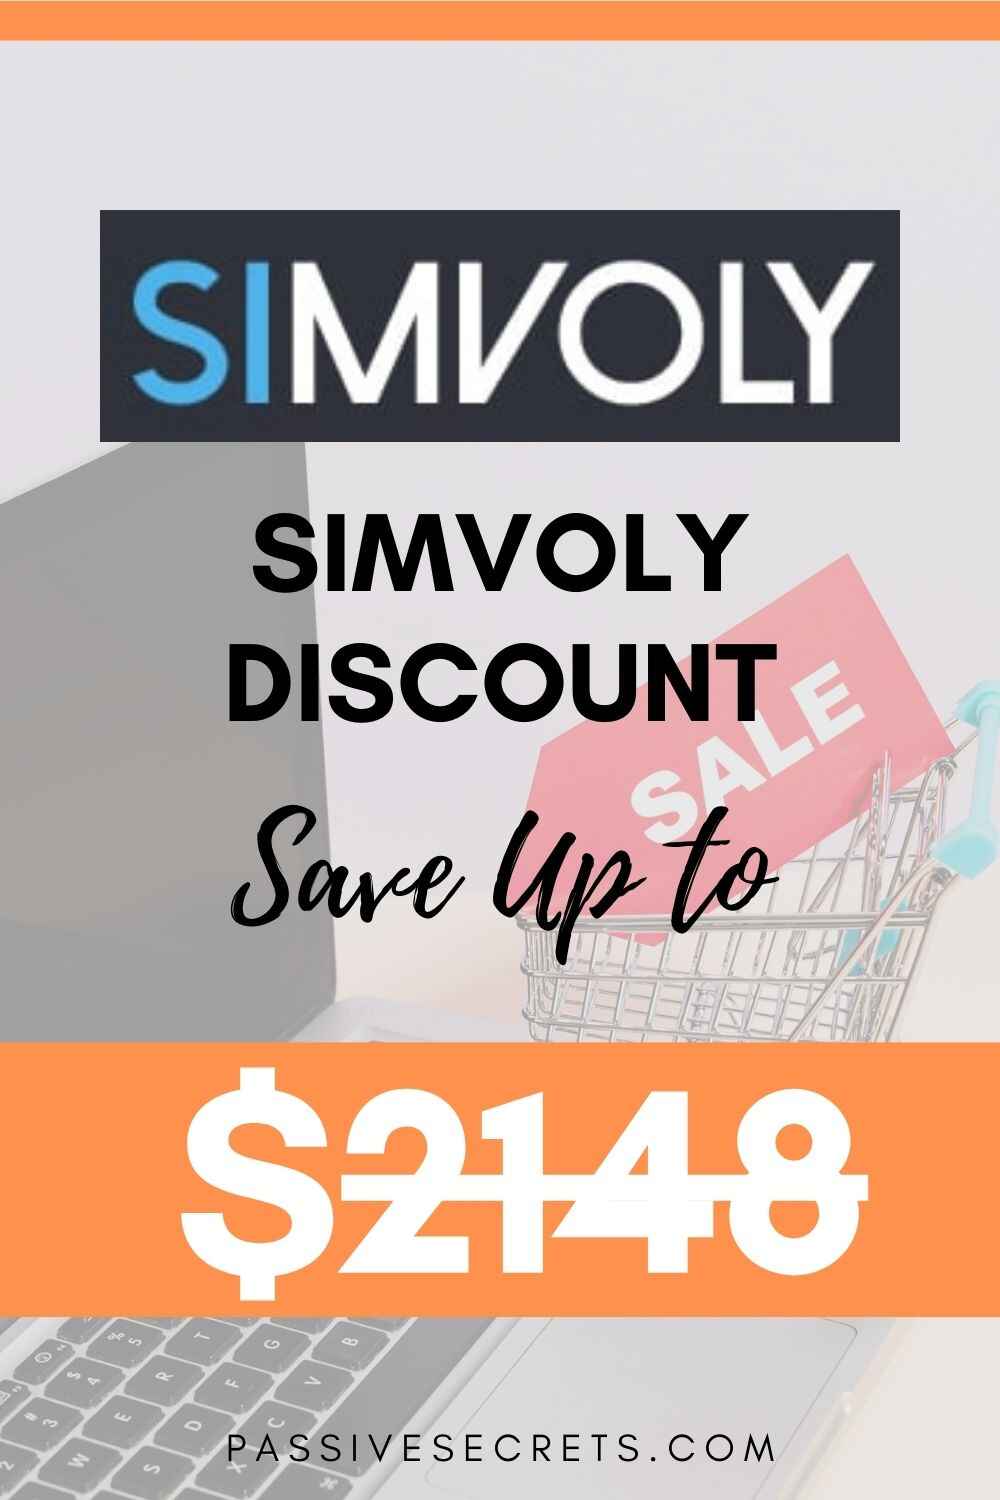 Simvoly discount coupon codes PassiveSecrets